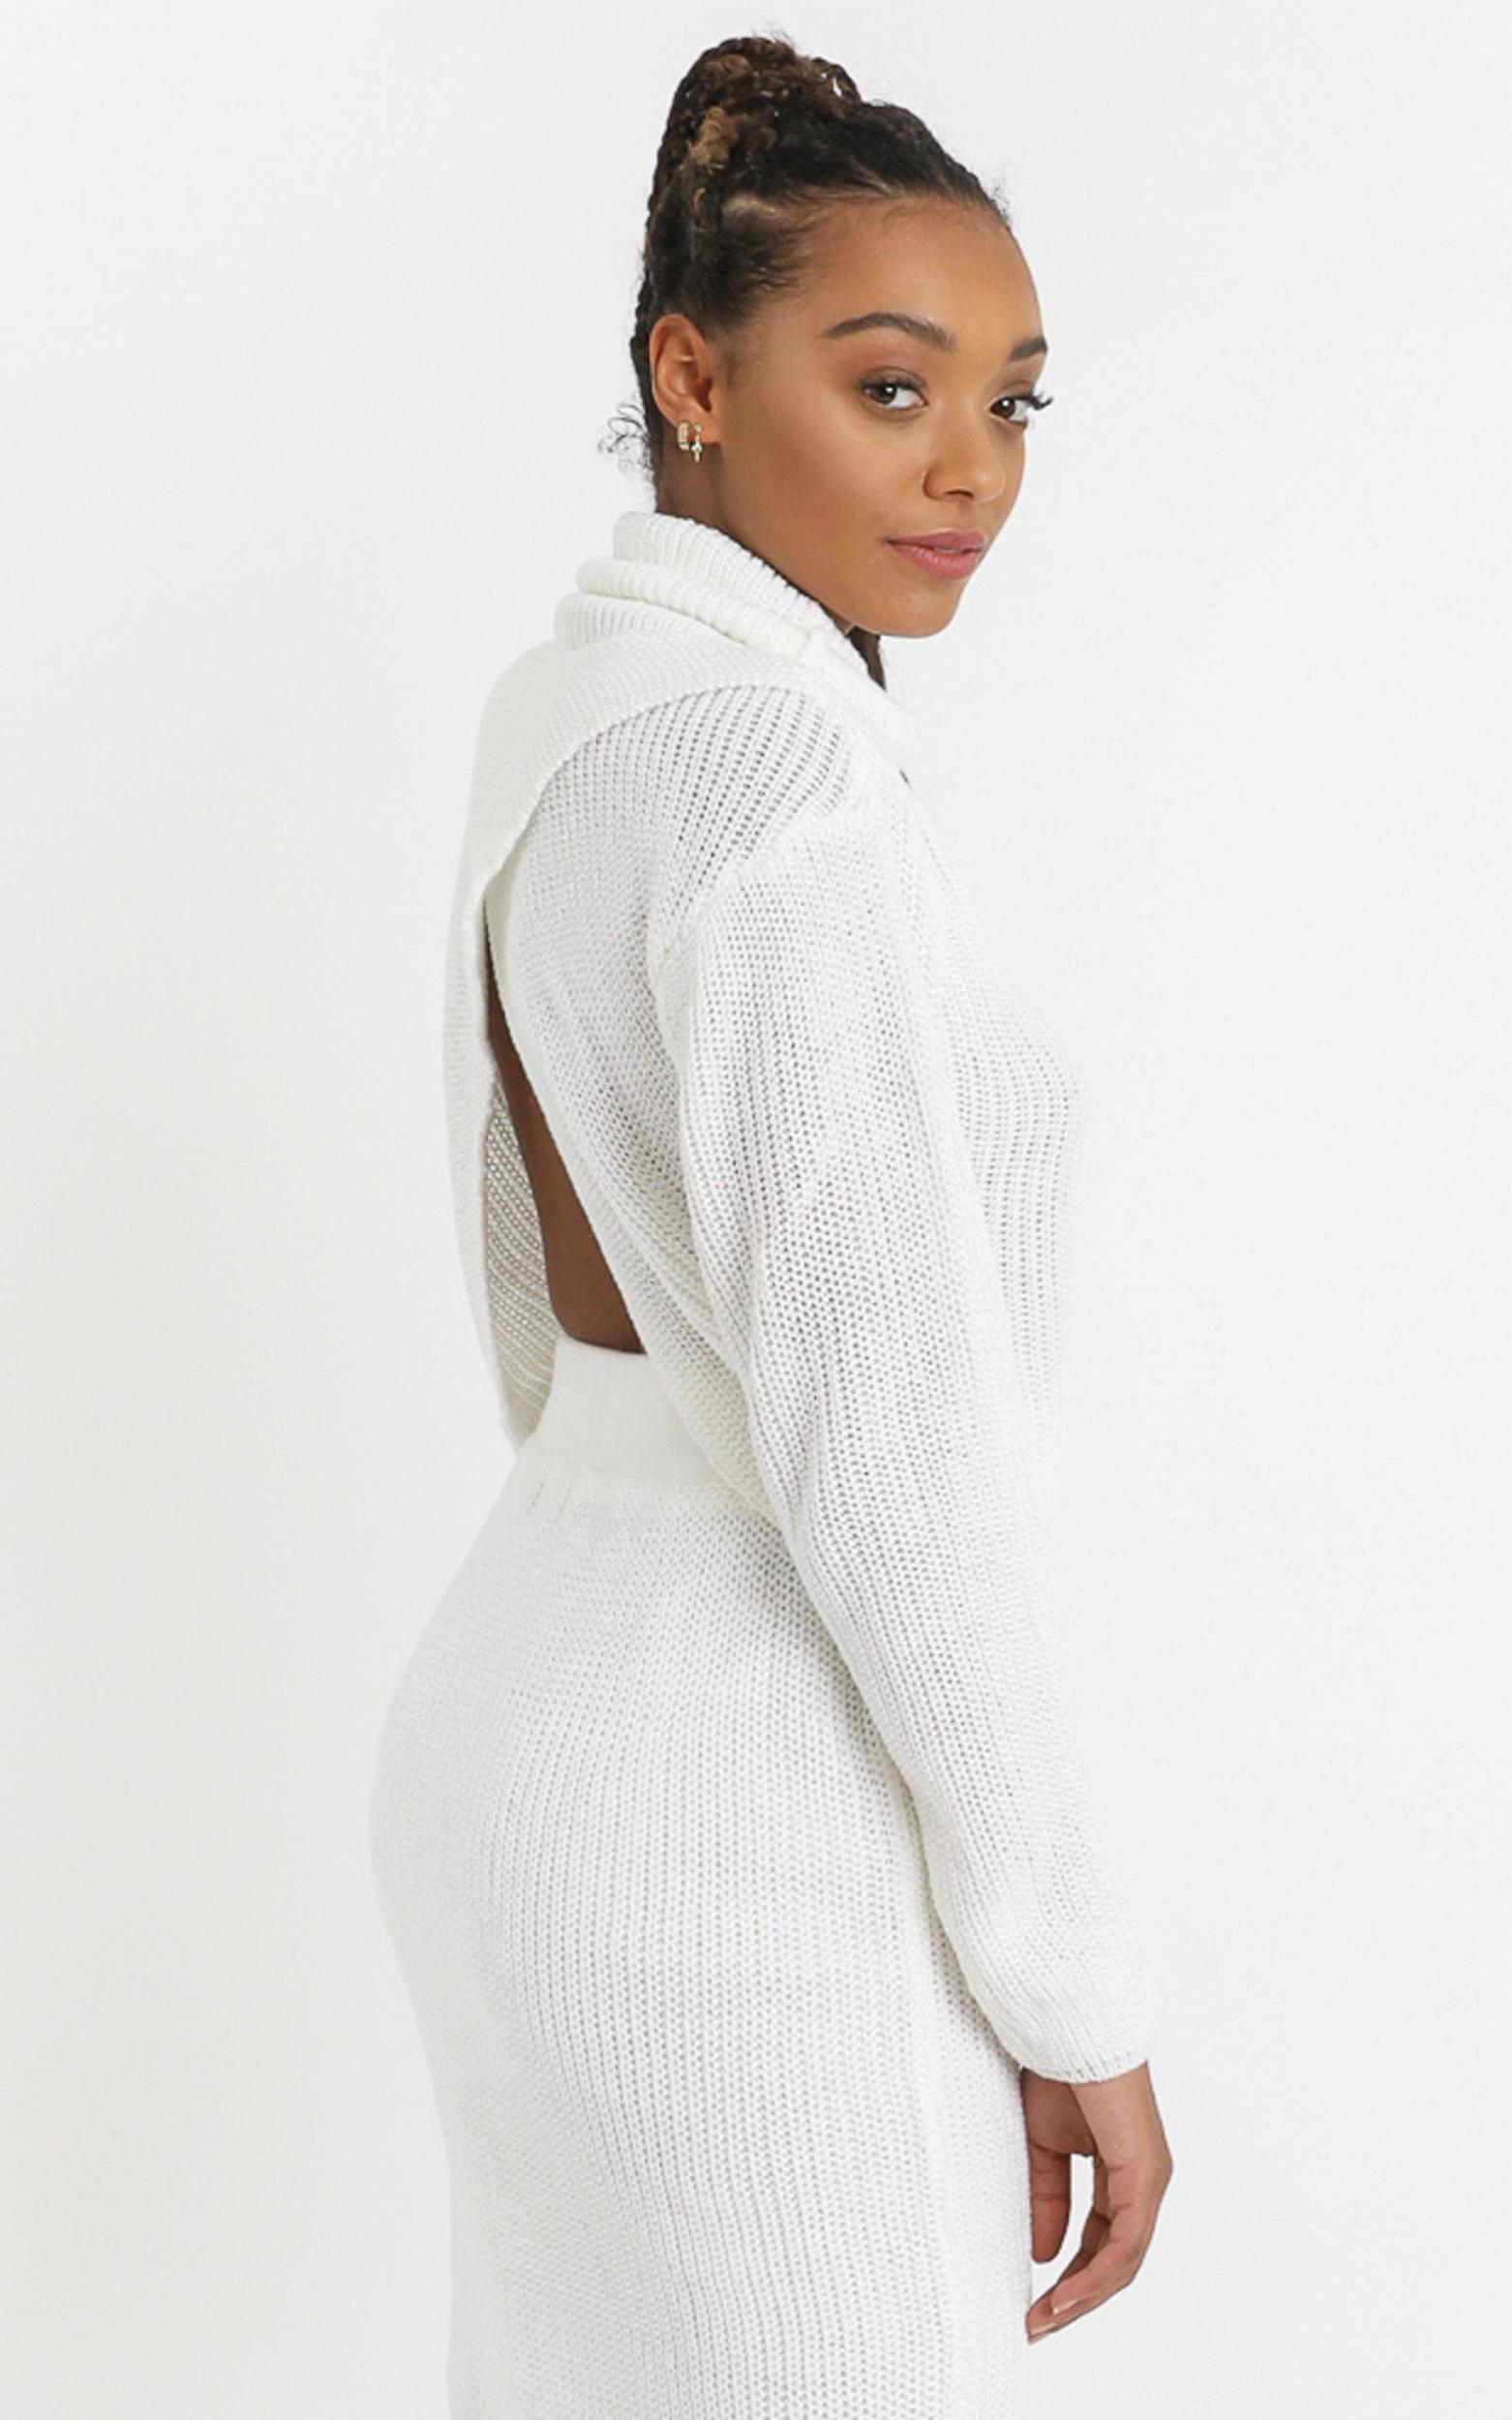 Edwynna Jumper in White - 8 (S), White, hi-res image number null